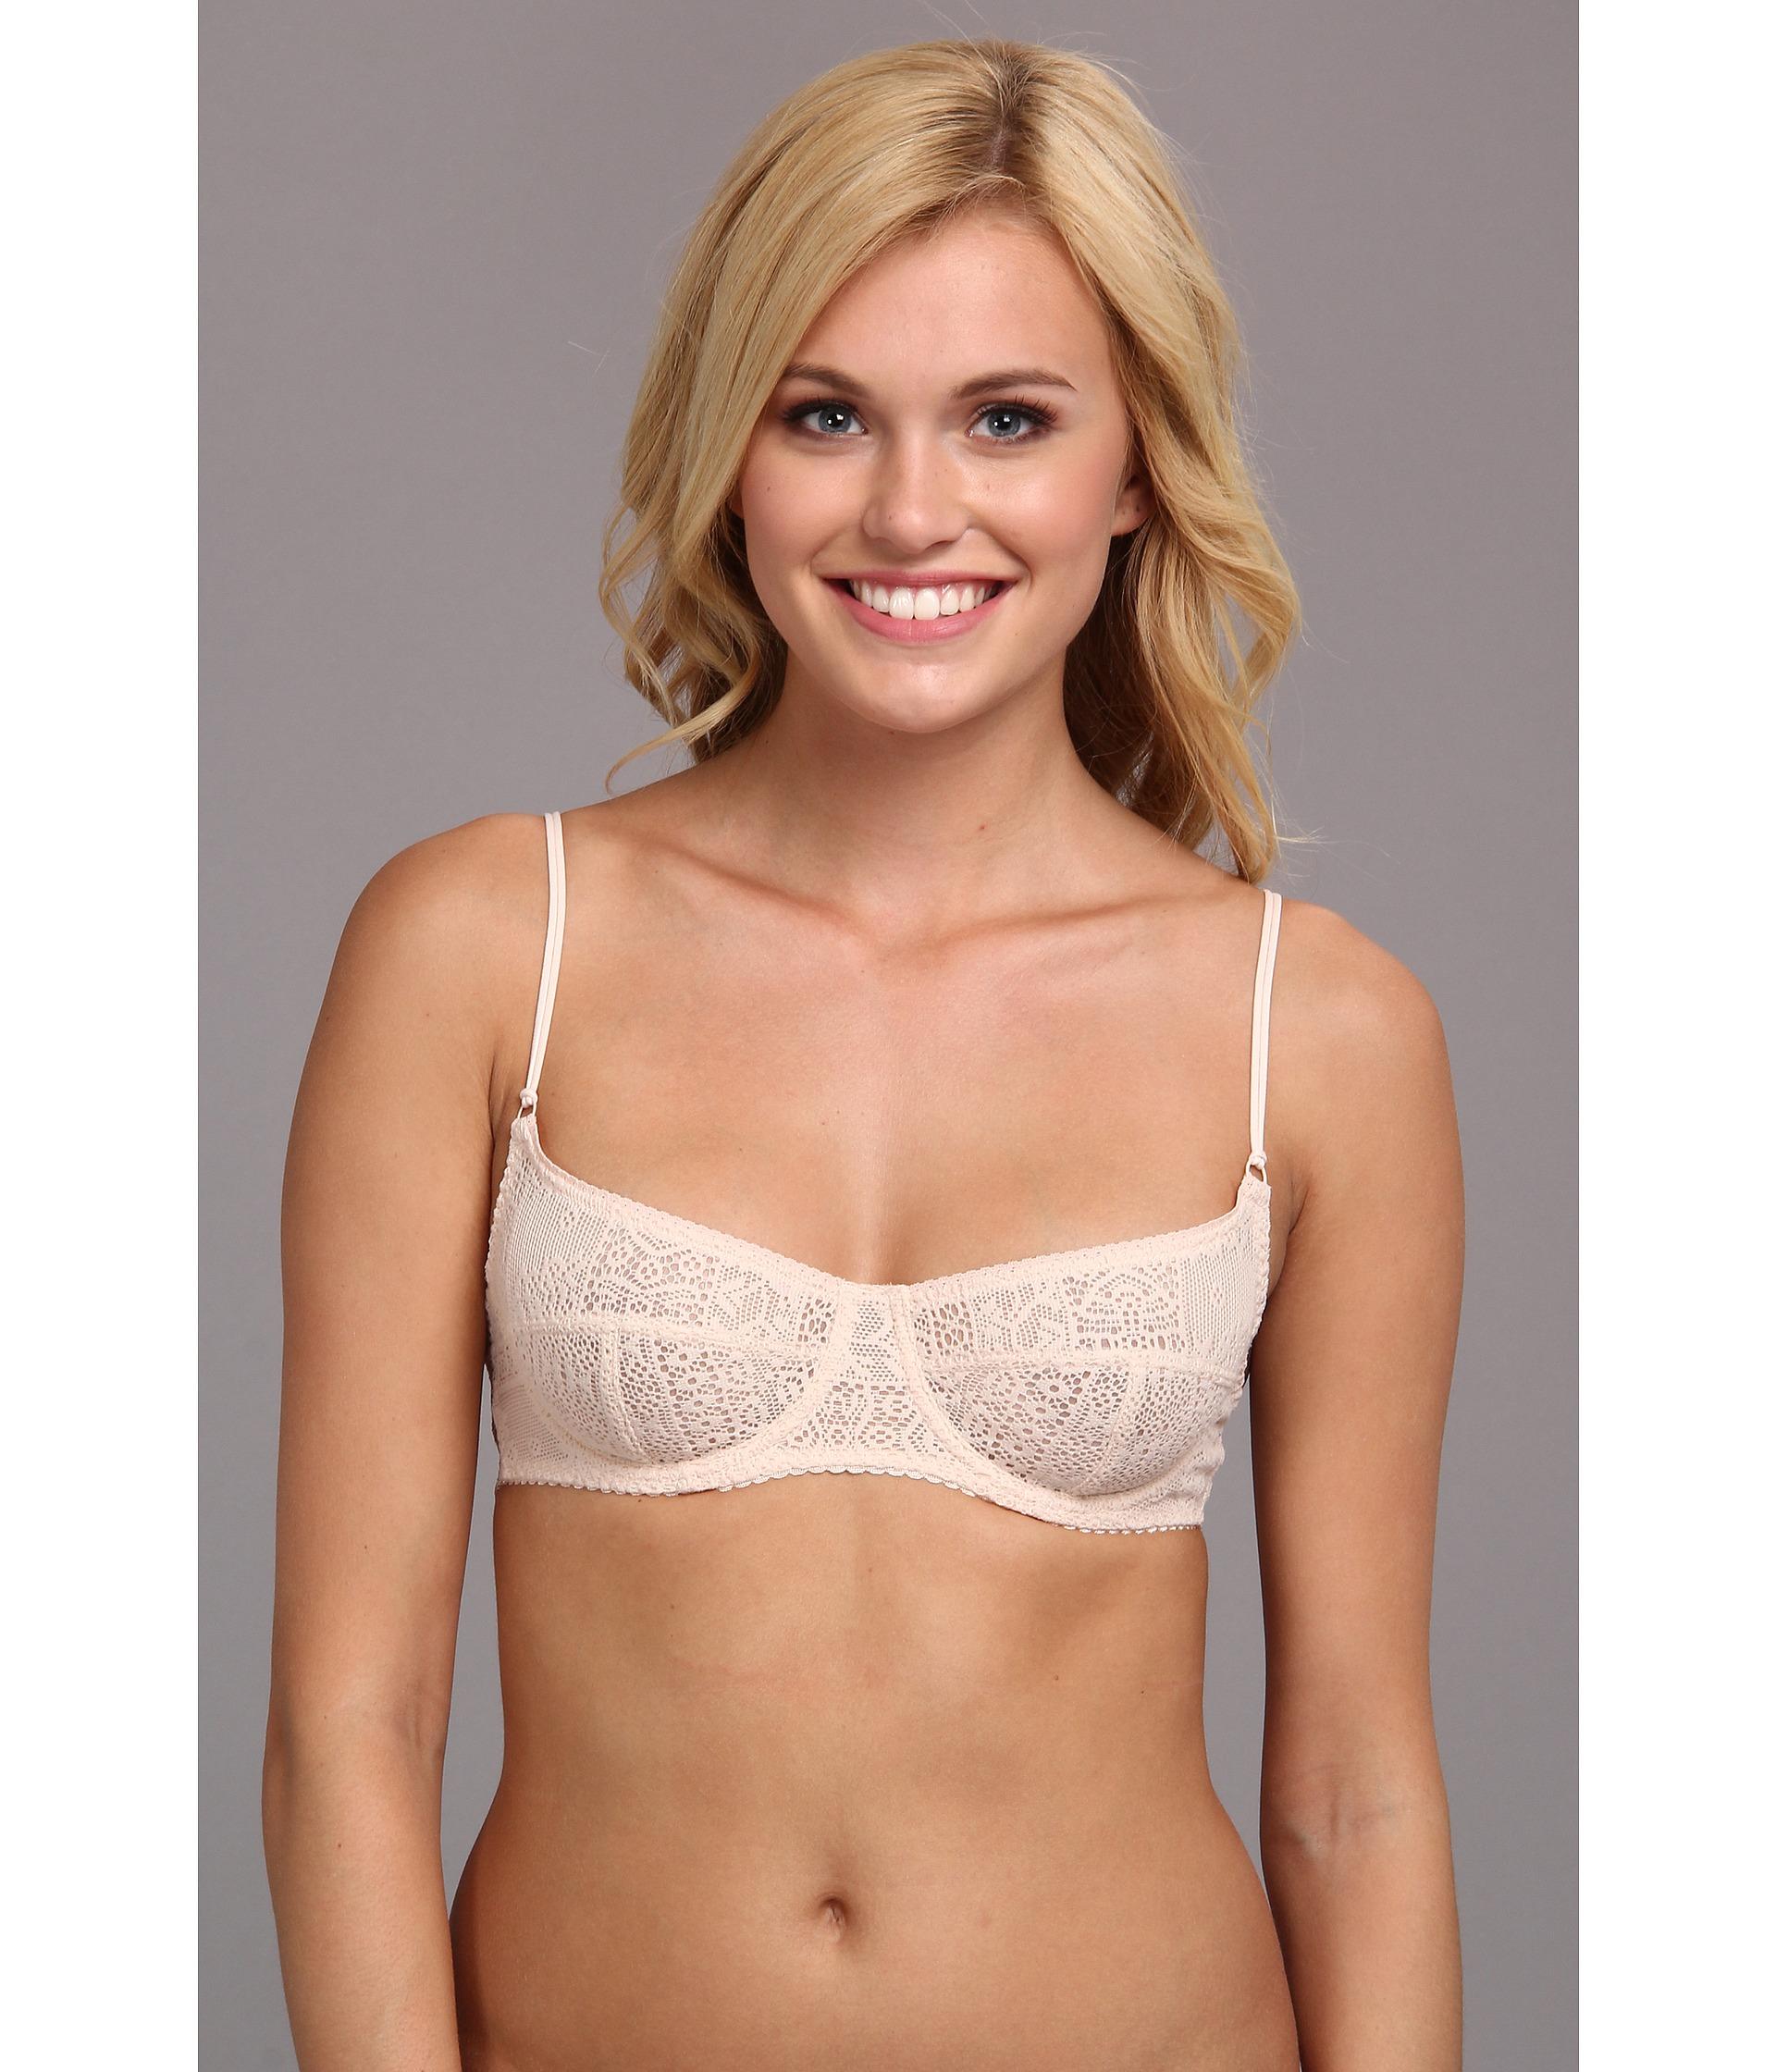 Lyst Free People Cheeky Lace Underwire Bra F515o690a In Natural